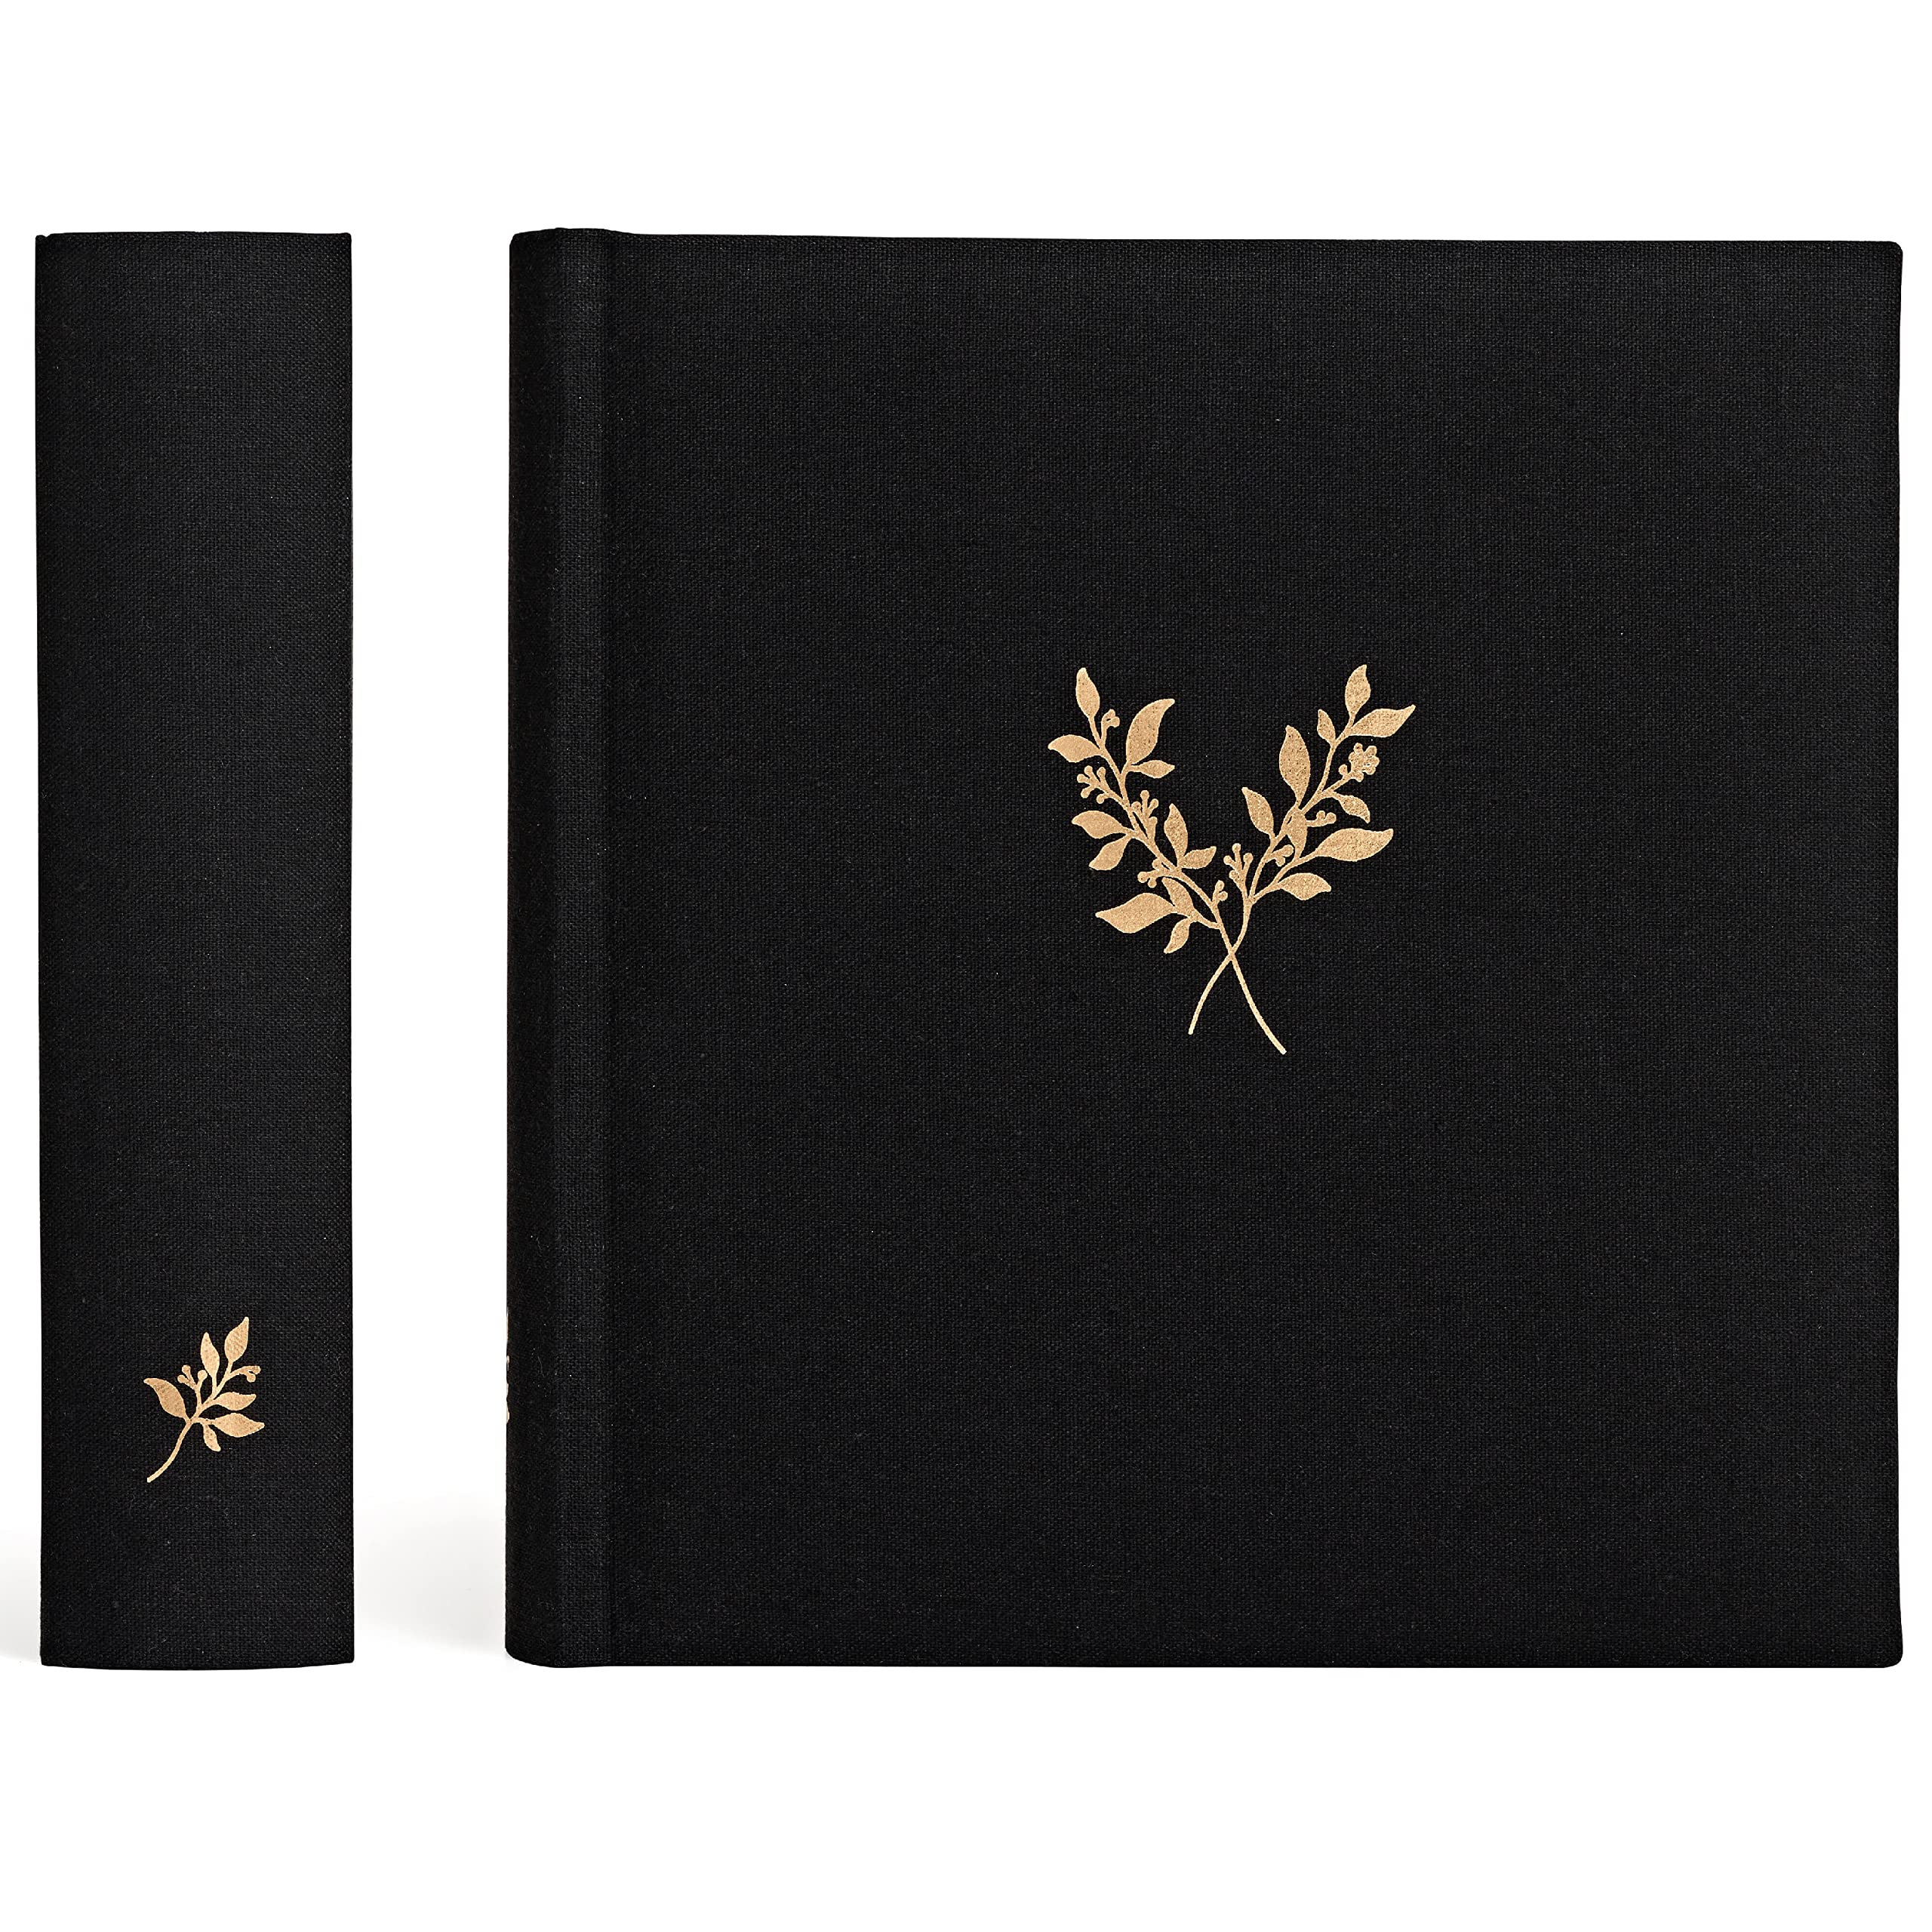 La Lente 1 Luxury Linen Photo Album with Acid Free Pockets, Traditional  Book Bound with Hard Cover, 200 Pockets for 4x6 Photos, Photo Book